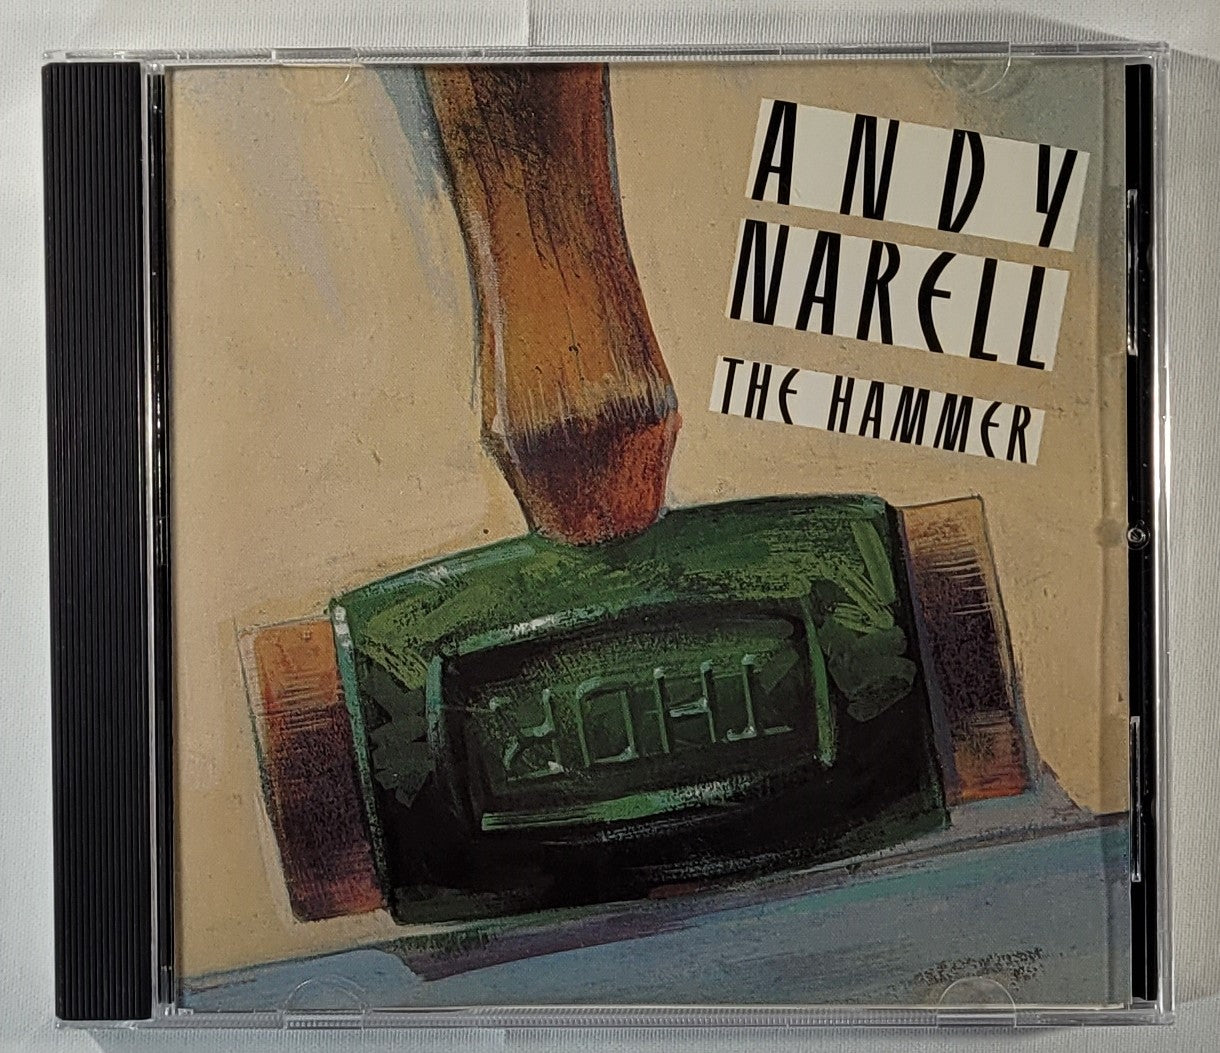 Andy Narell - The Hammer [1987 Used CD]